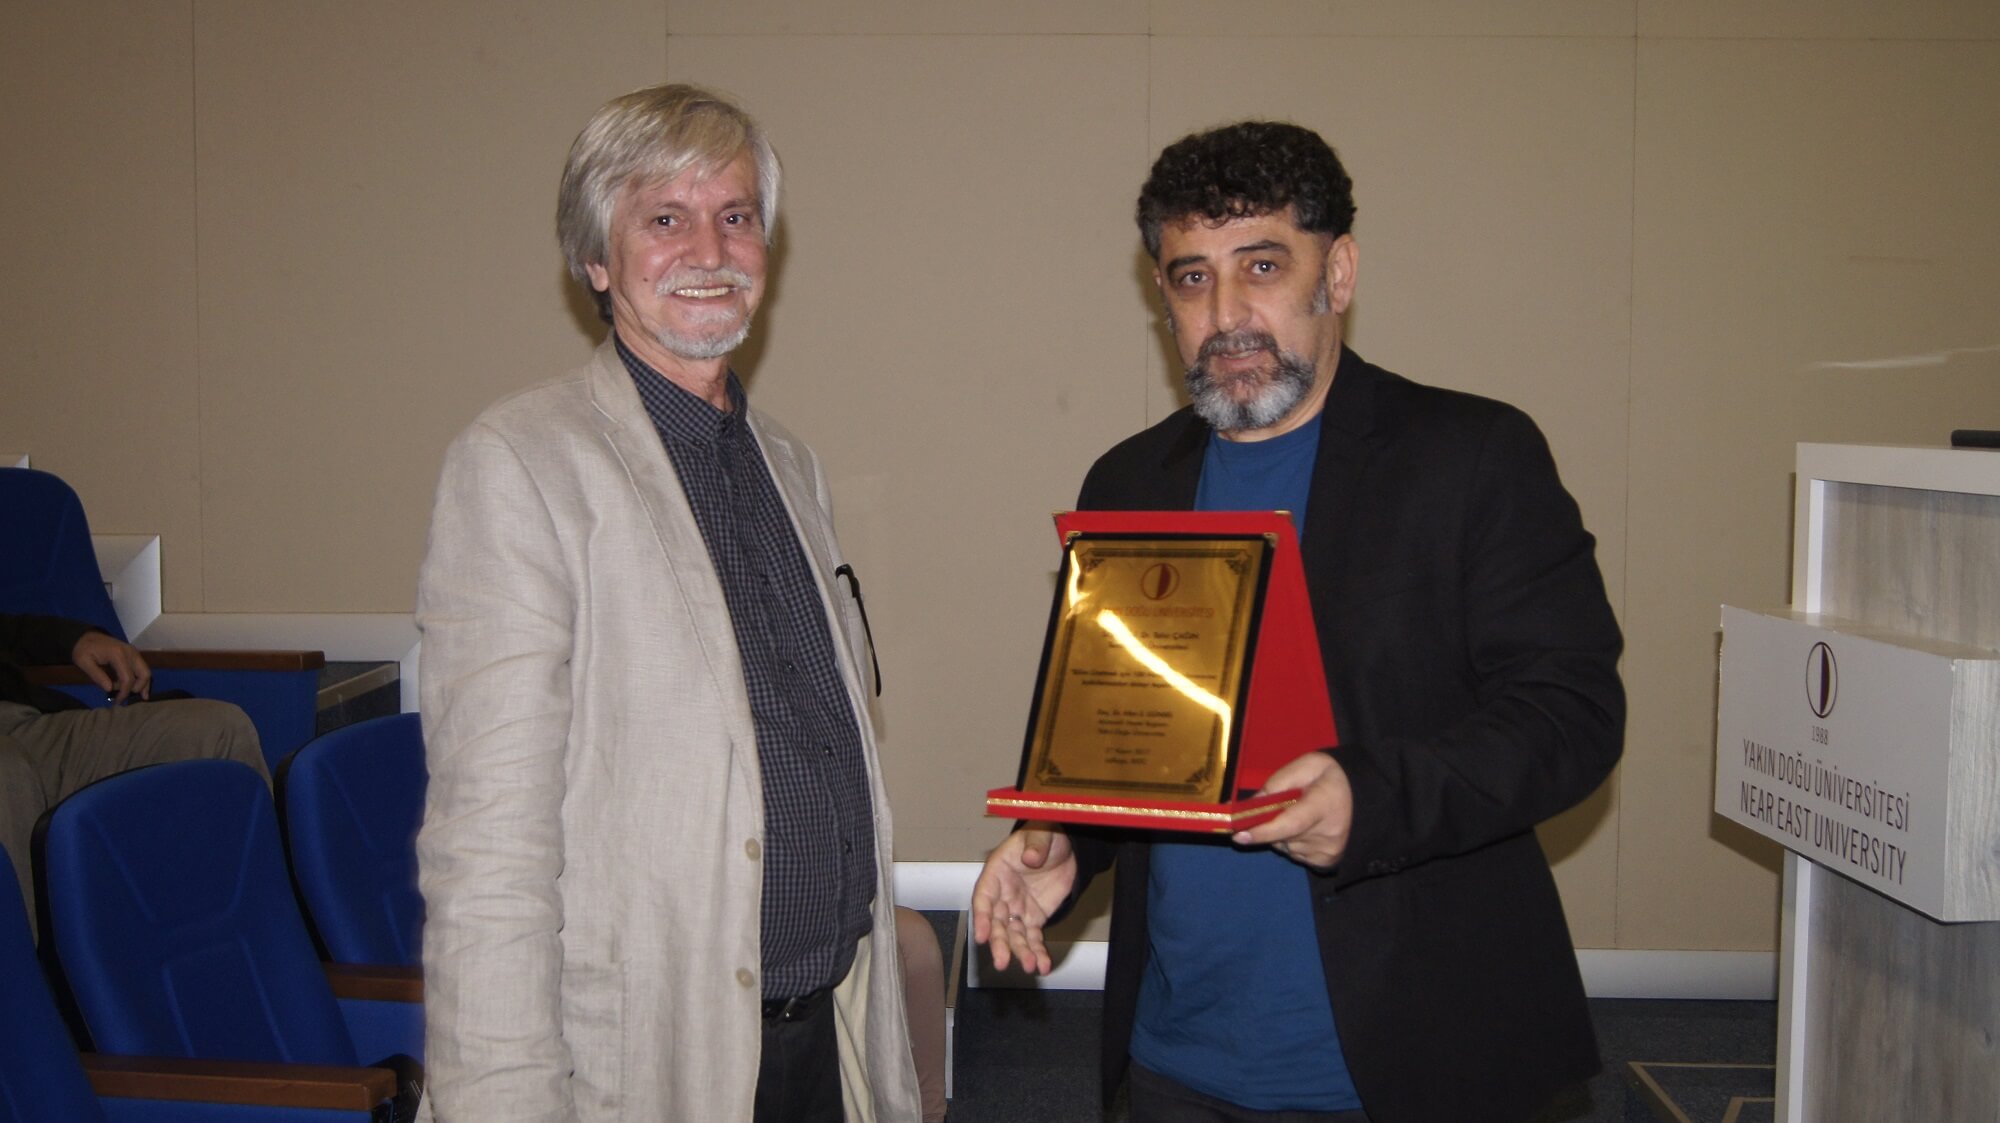 Organized by Near East University, Conference Series on ‘100 Reasons to Produce Science’ hosted Prof. Dr. Çağın for a conference themed on Nanotechnologies